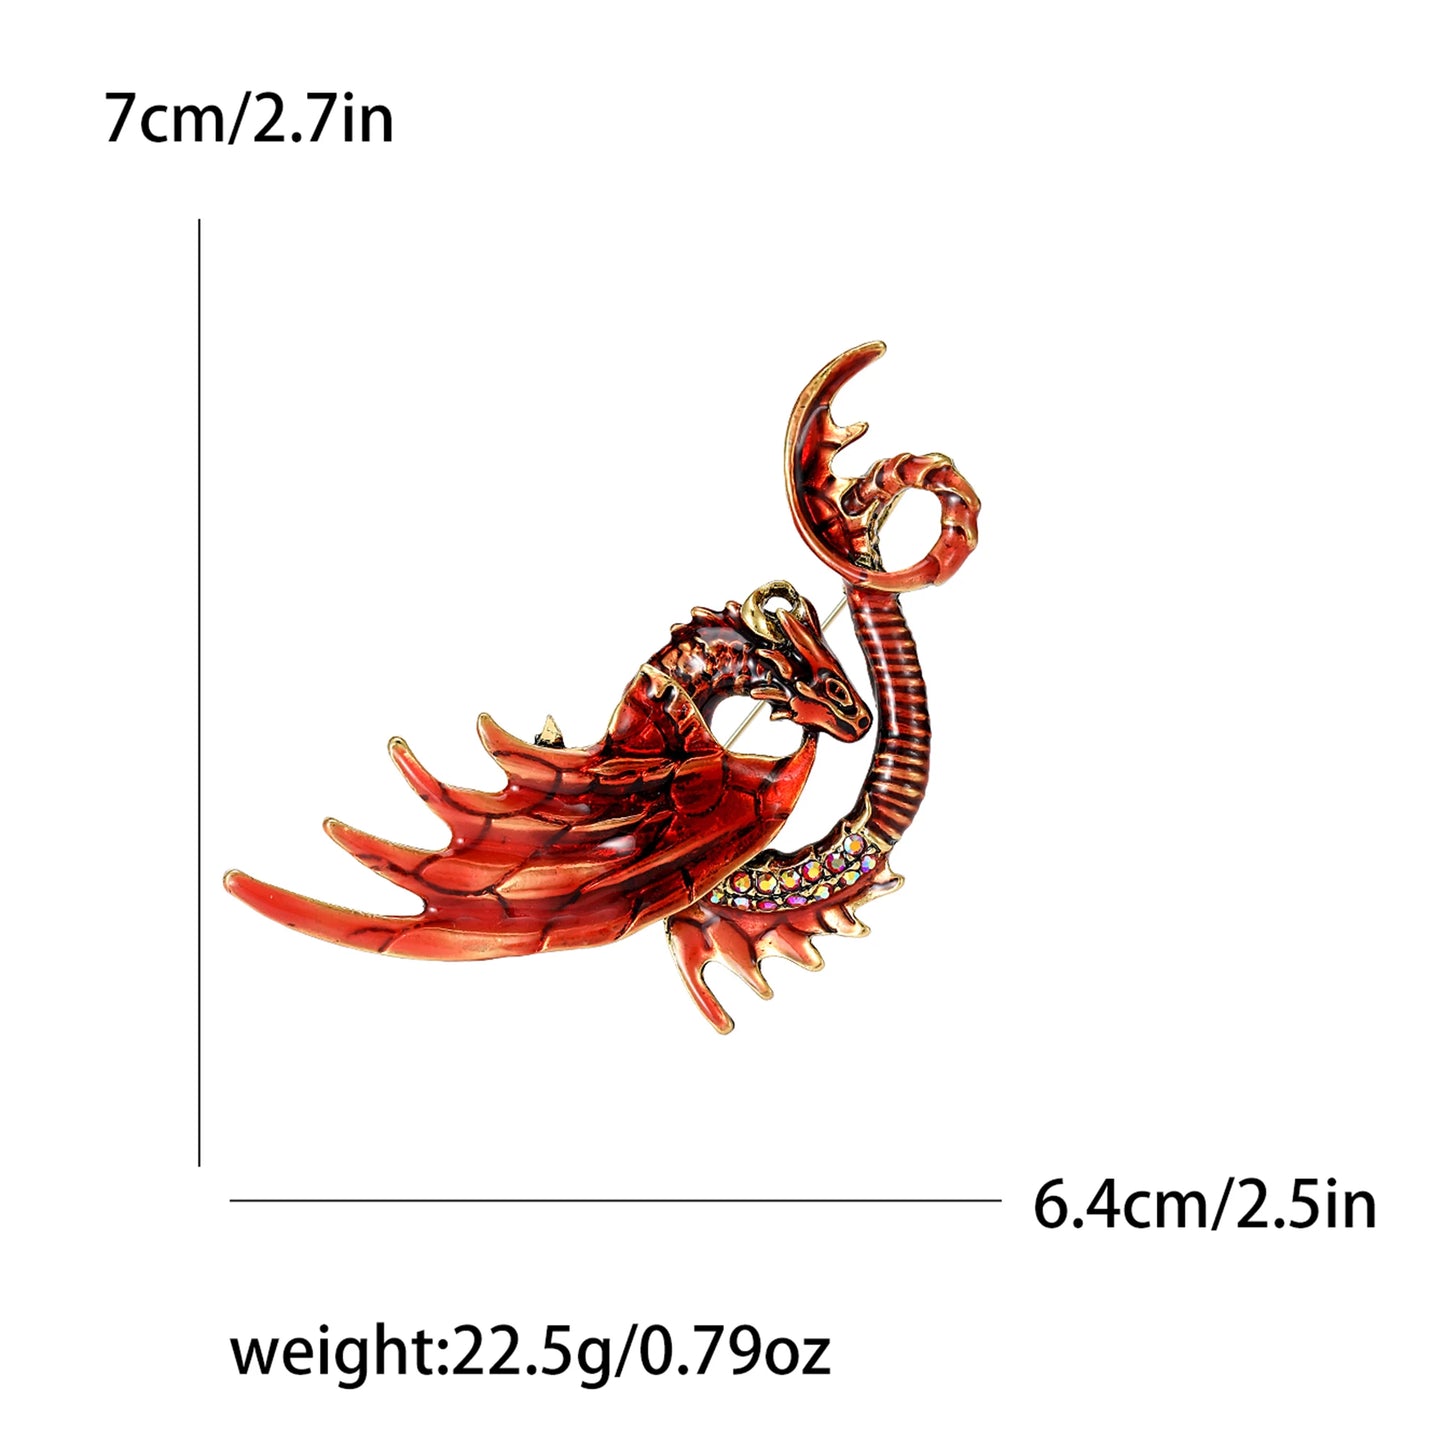 Enamel Dragon Brooches - Mythical Pieces